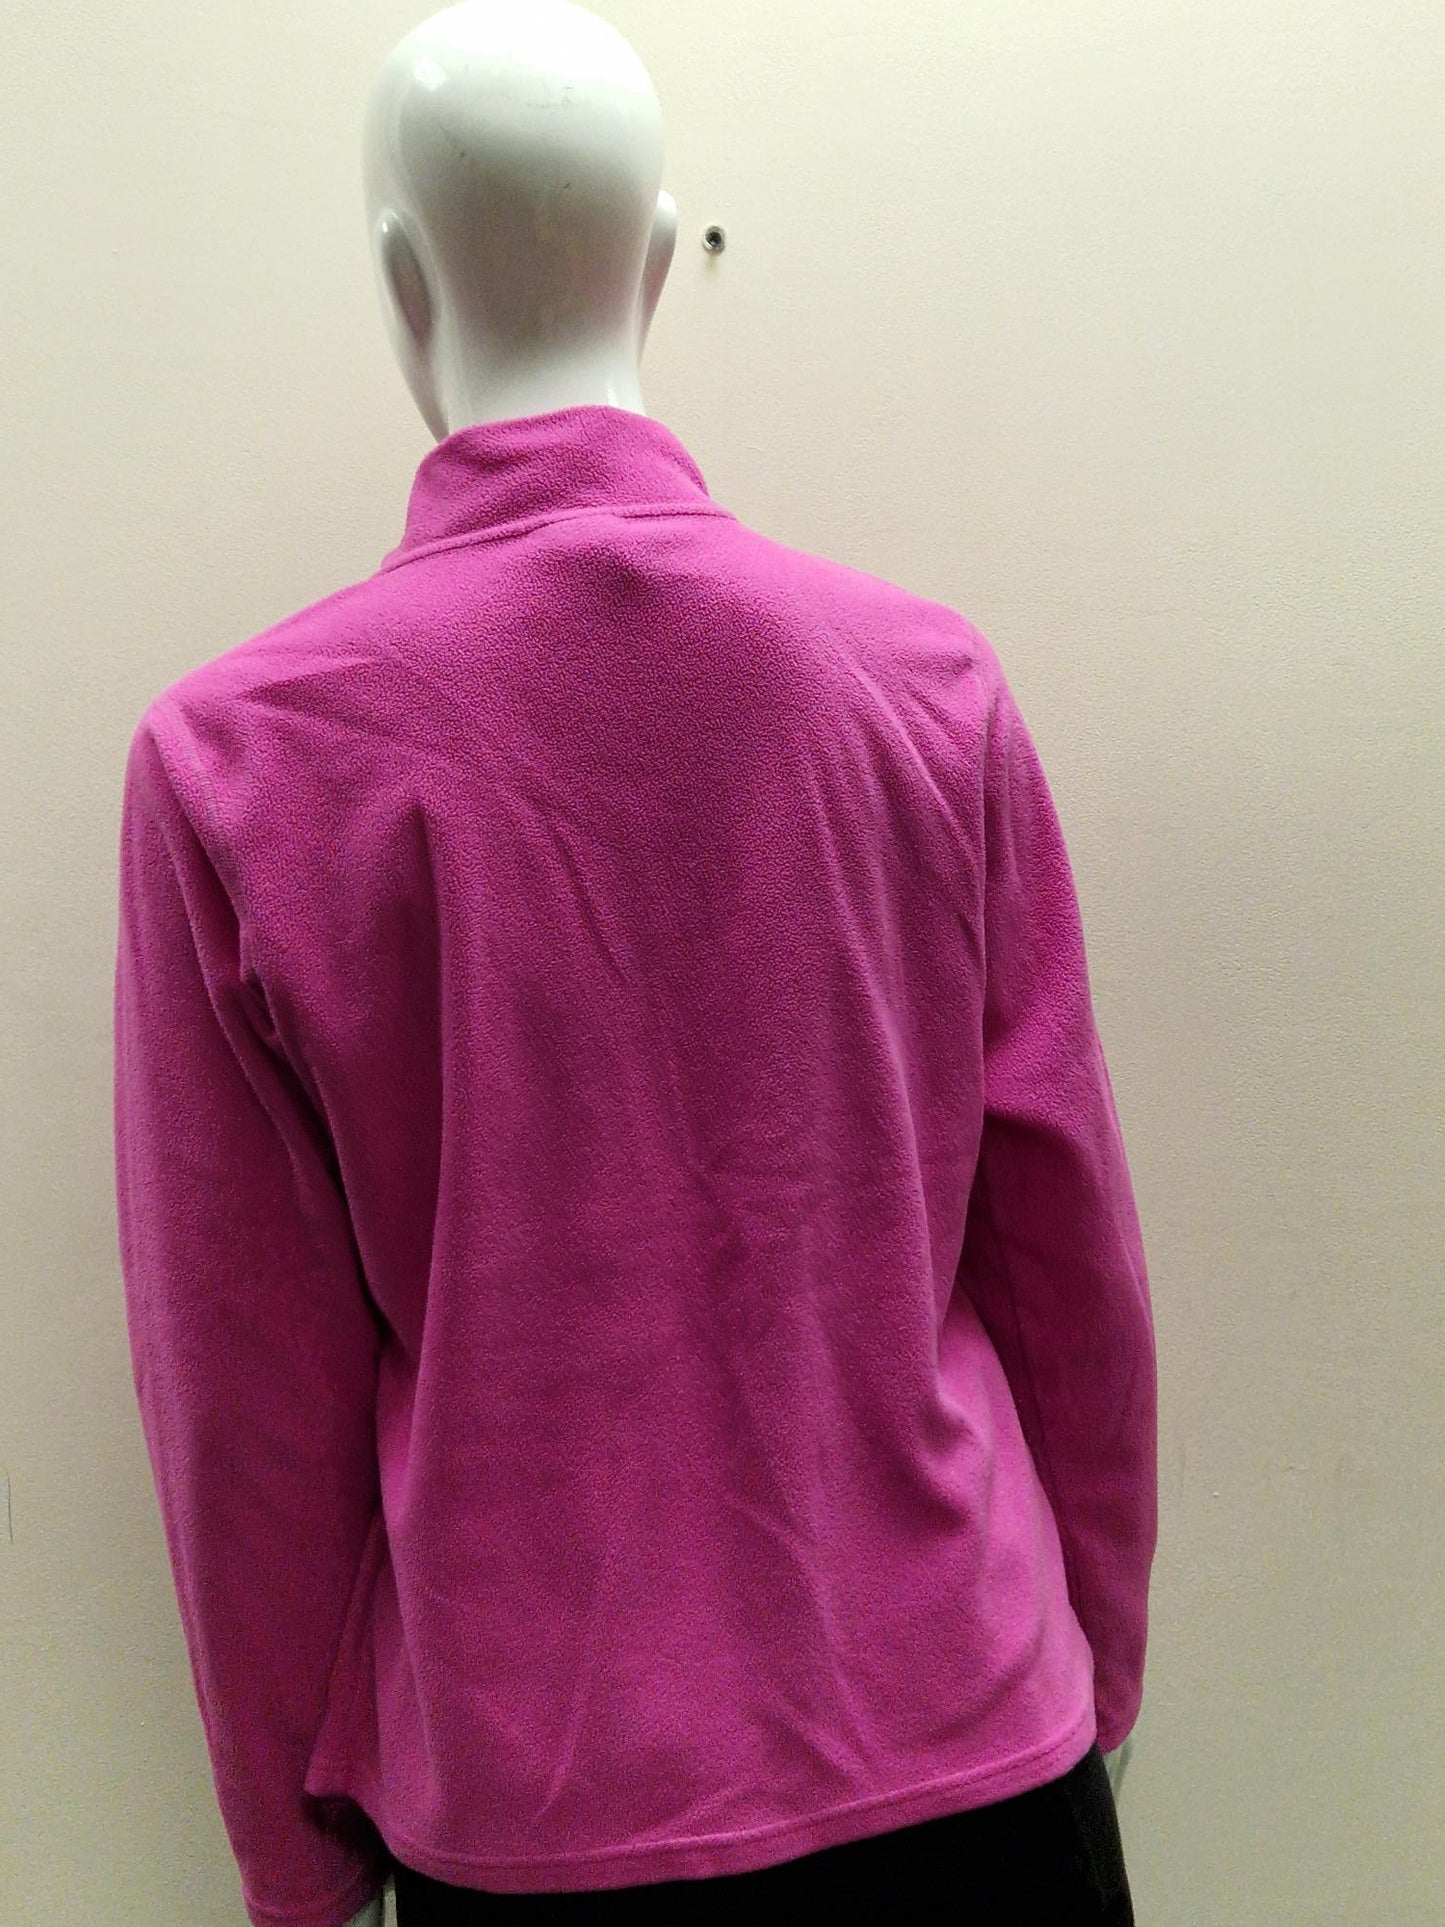 North Face Ladies fleece in Pink - Size Large